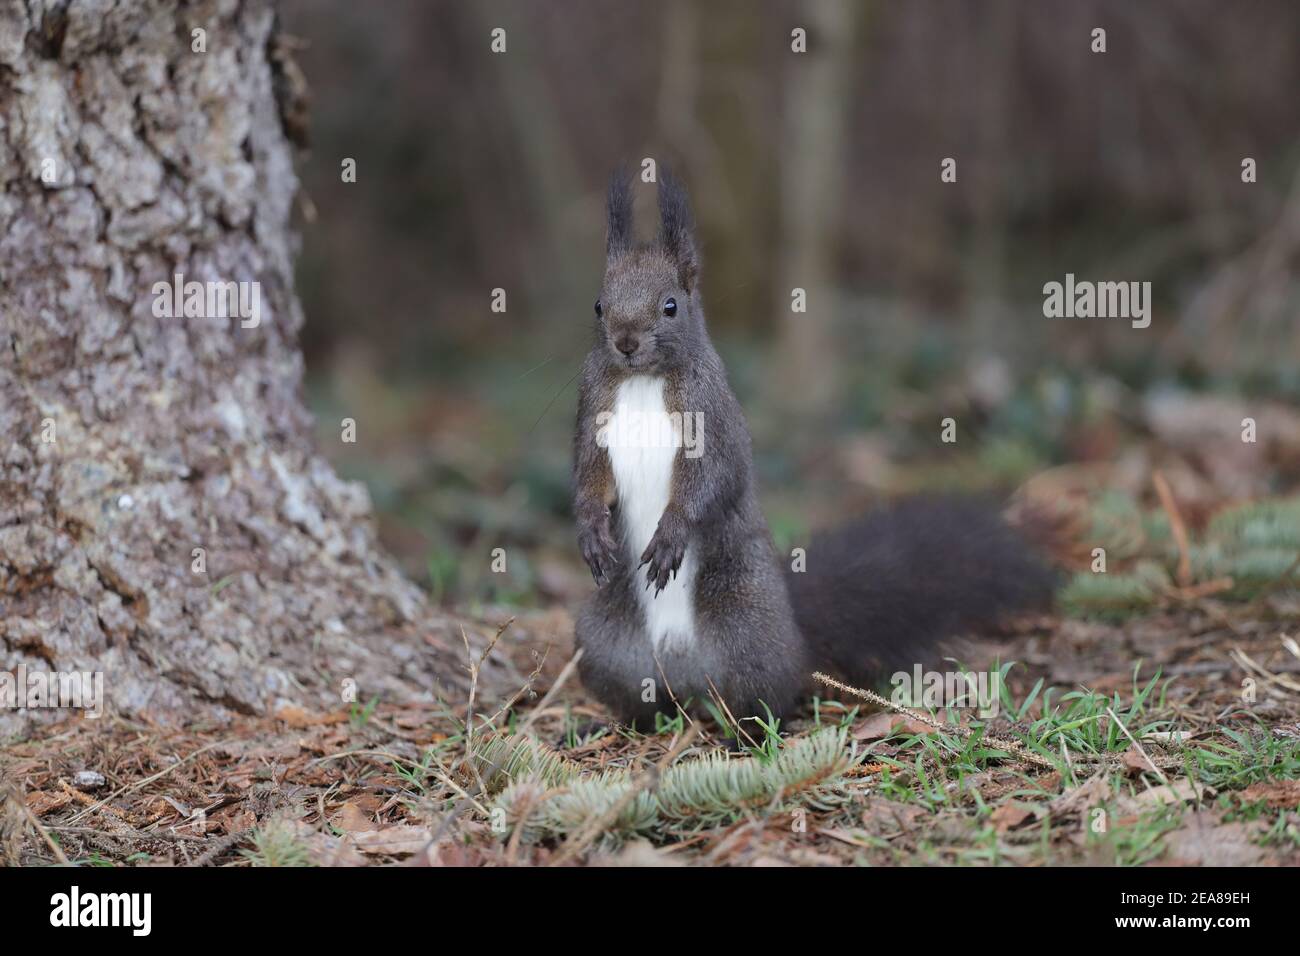 Squirrel stands on the ground upright Stock Photo